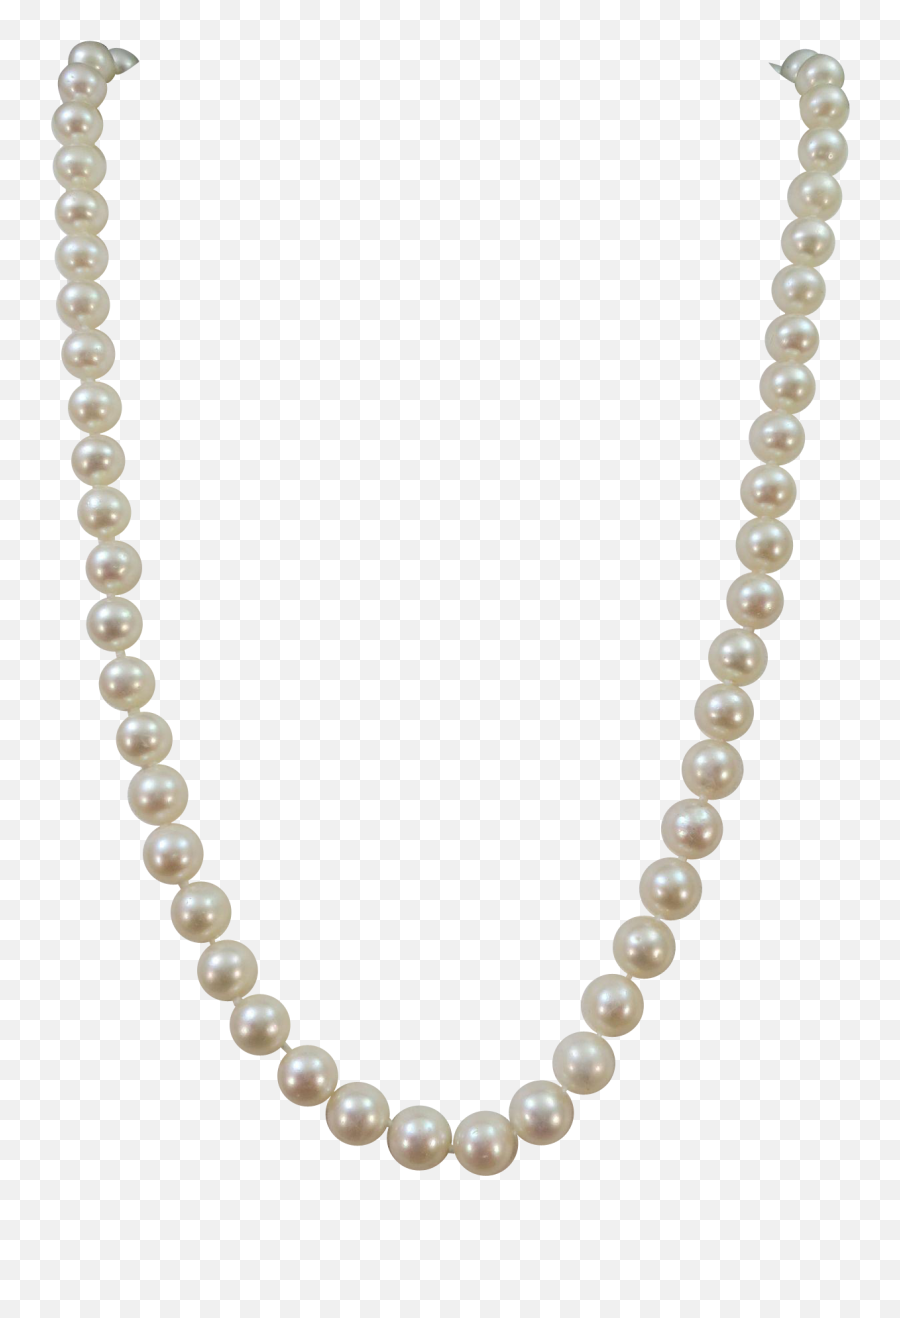 Pin - Pearl Necklace Transparent Background Emoji,Pearls Png